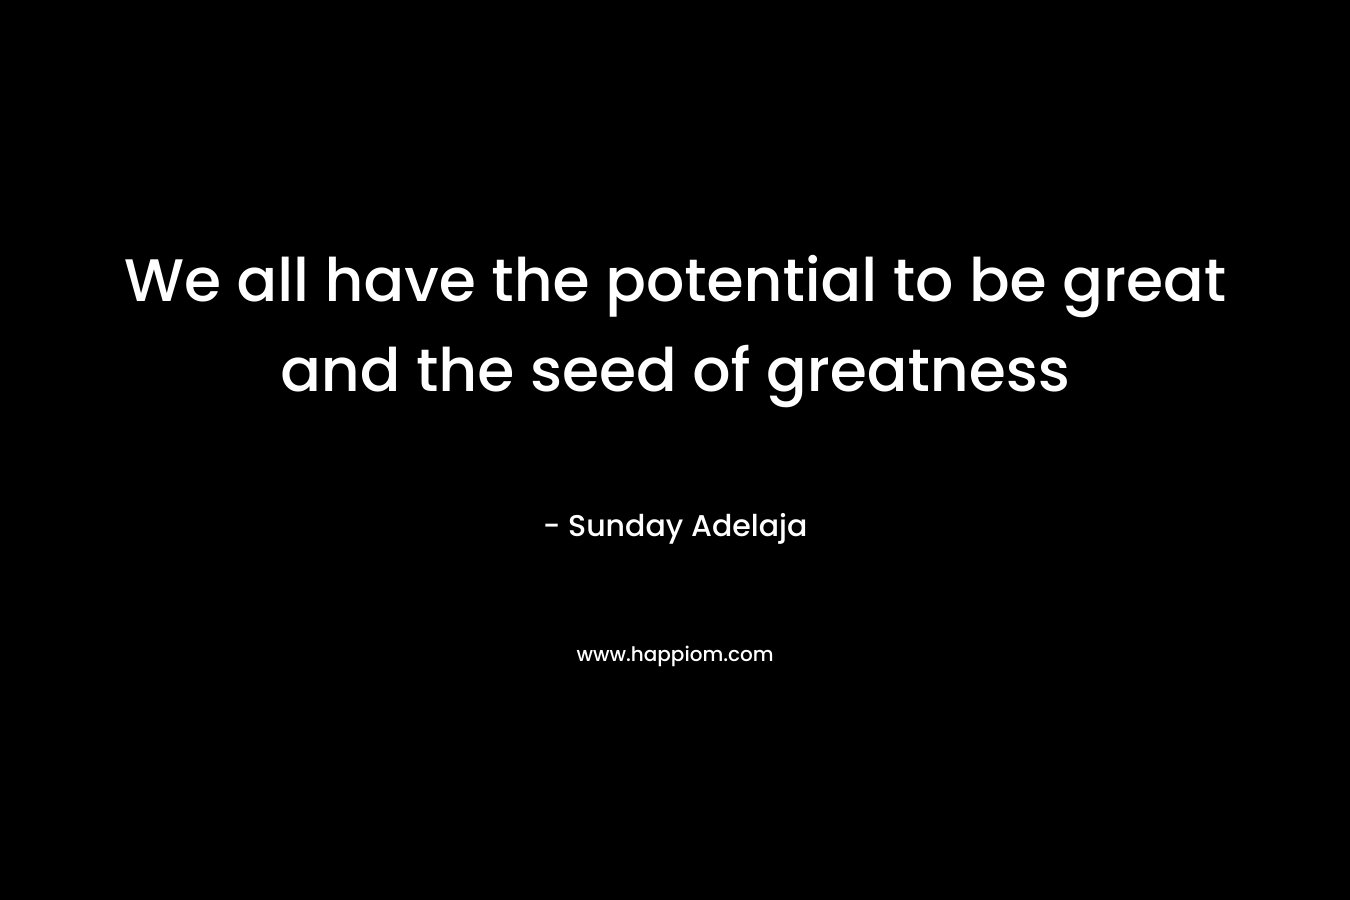 We all have the potential to be great and the seed of greatness